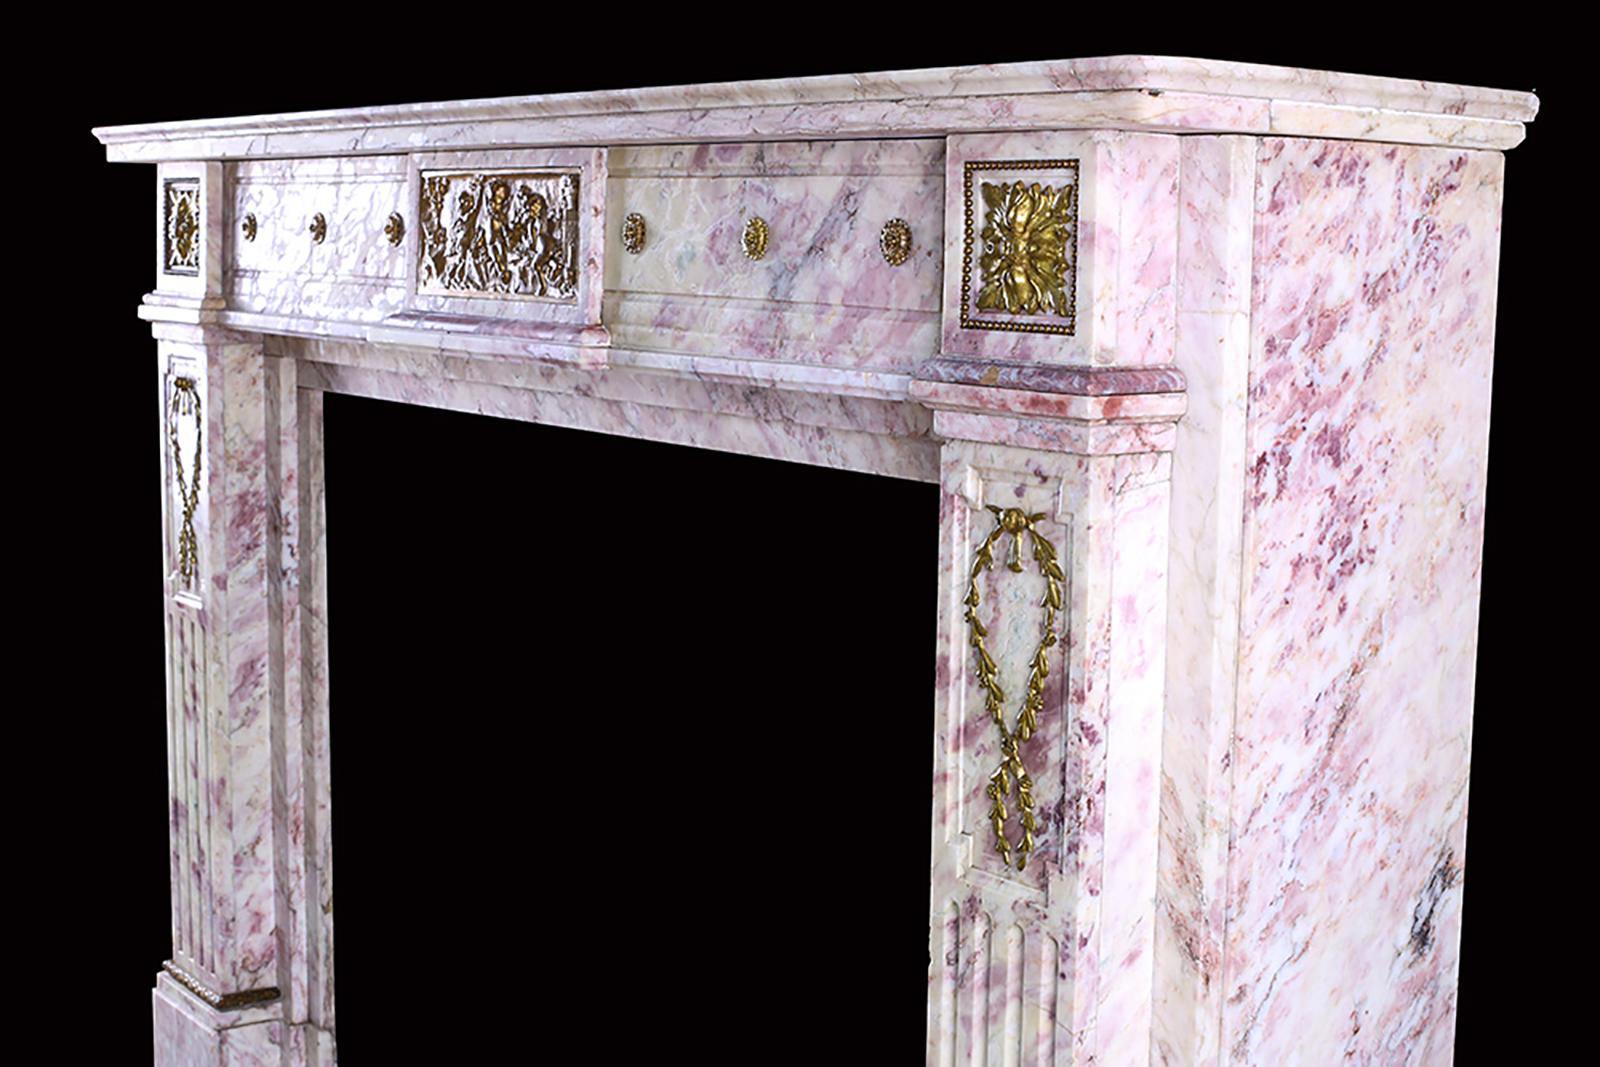 Elegant Louis Xvi Style Fireplace Surround, French, Mid 19th Century In Good Condition For Sale In London, GB